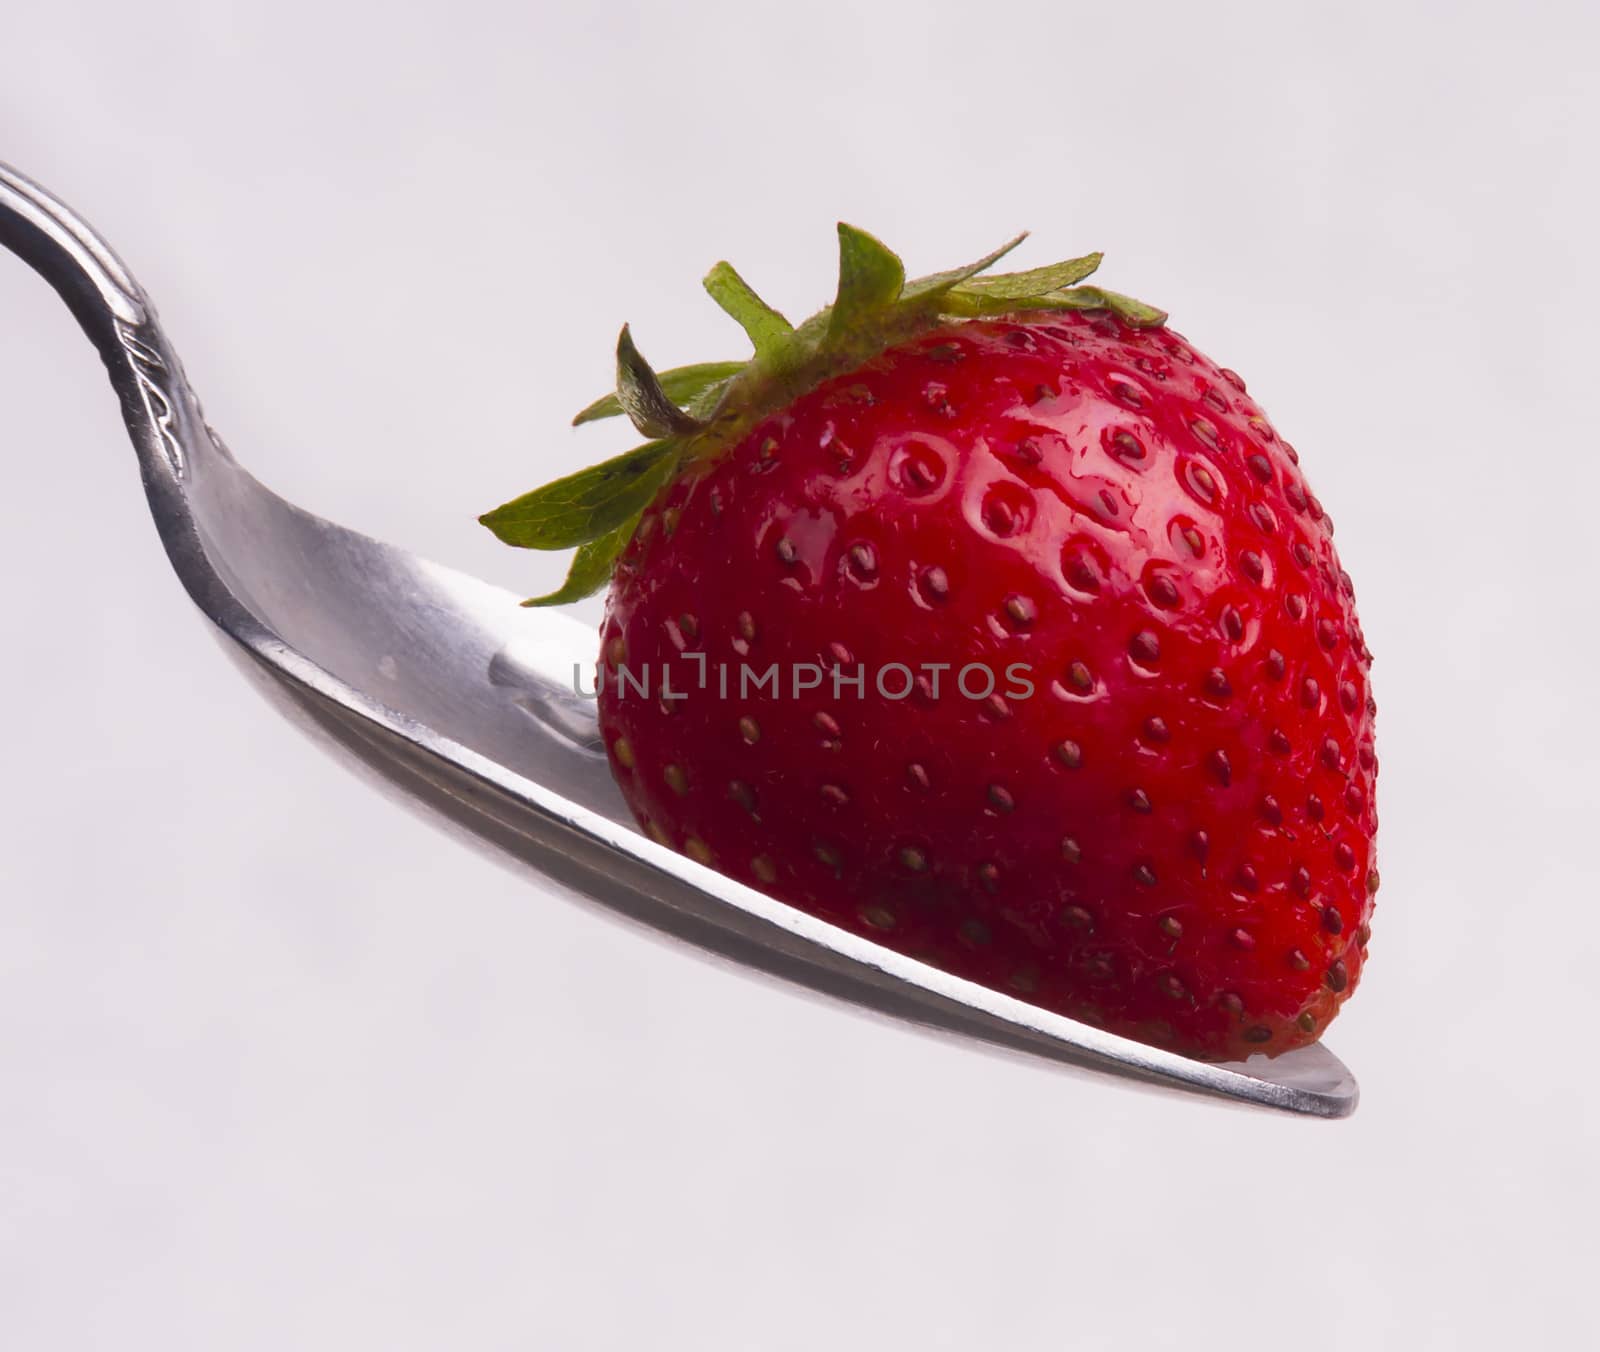 A Silver Spoon Sulverware Utensil Holds Fresh Raw Food Red Strawberry Sweet Snack